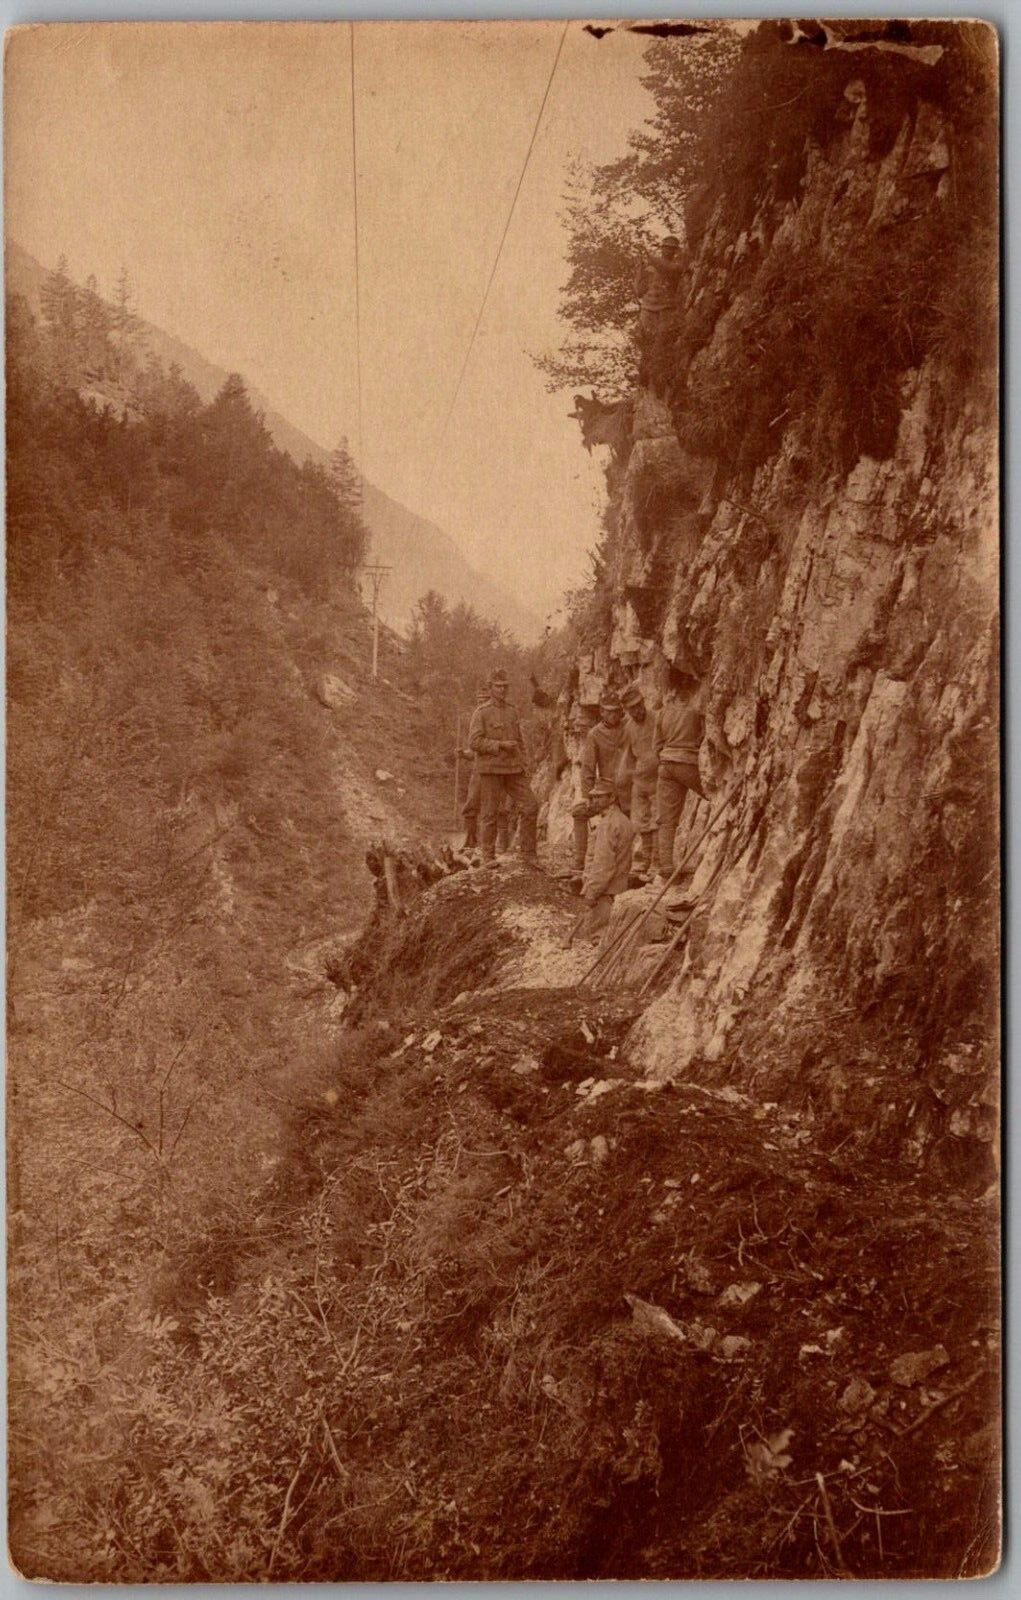 Postcard Austrian Soldiers? Hiking/Building Side of a Mountain/Hill RPPC WW1? Ew